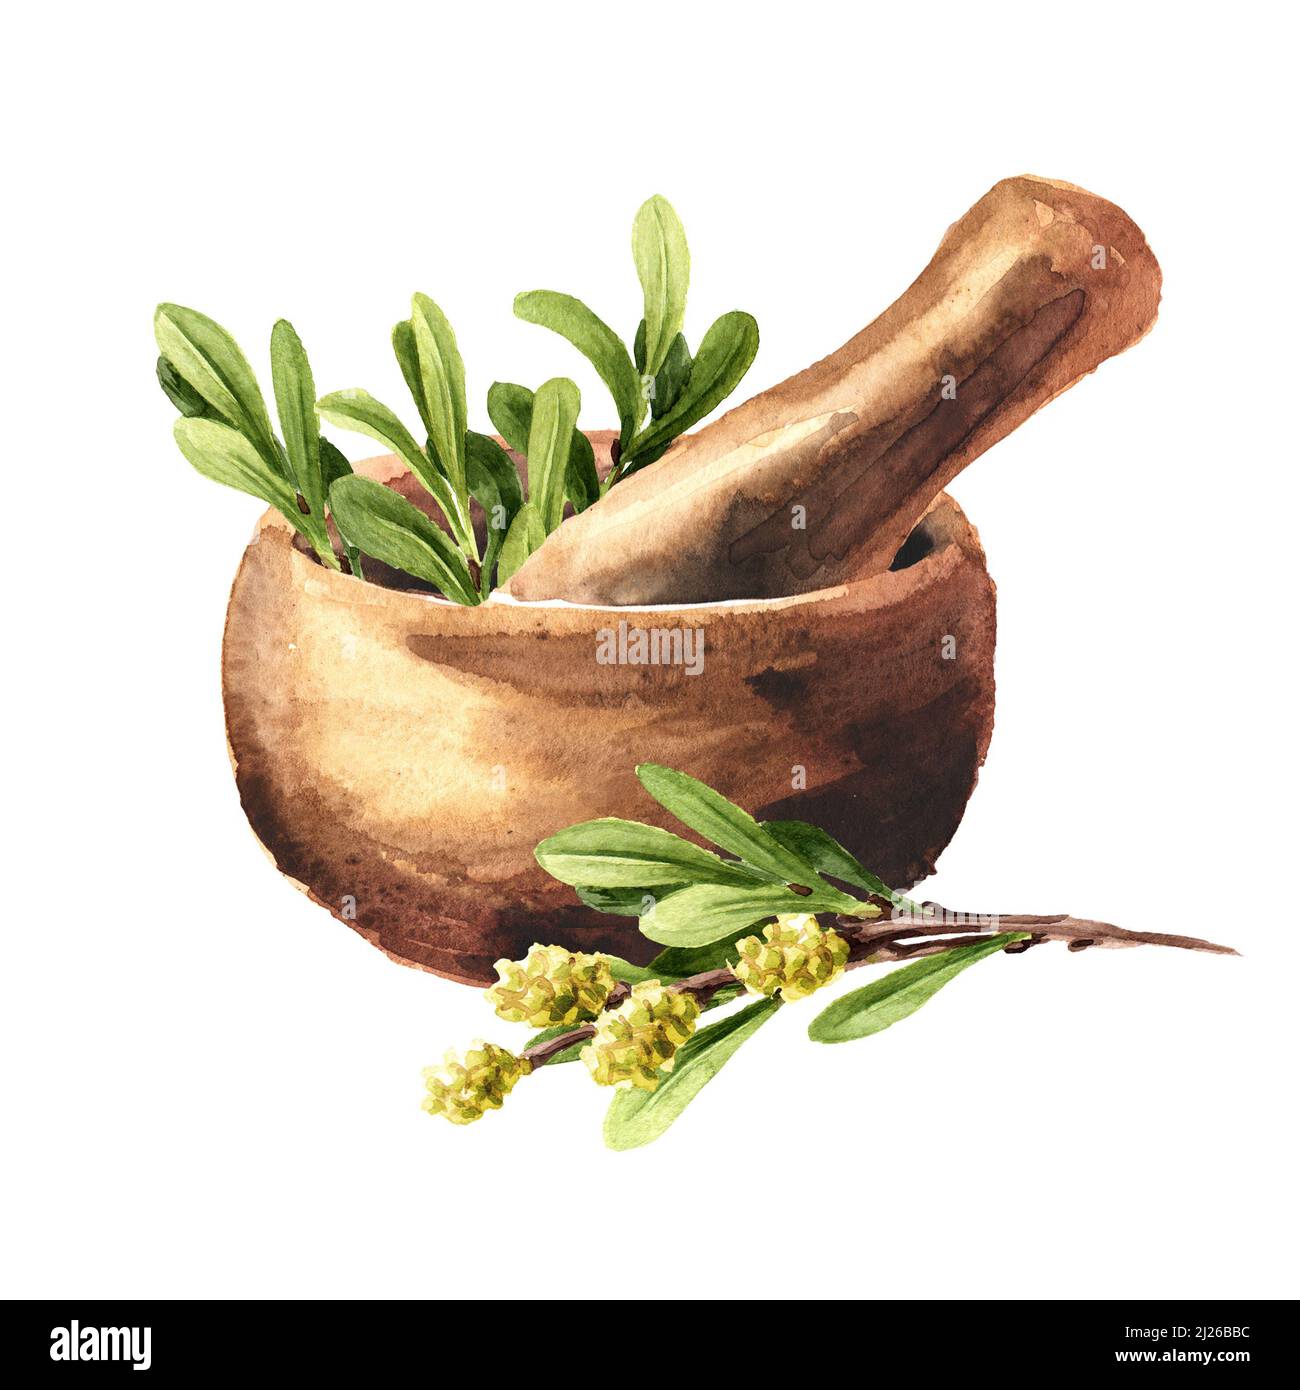 Bog myrtle and mortar. Medicinal  plant. Hand drawn watercolor illustration, isolated on white background Stock Photo